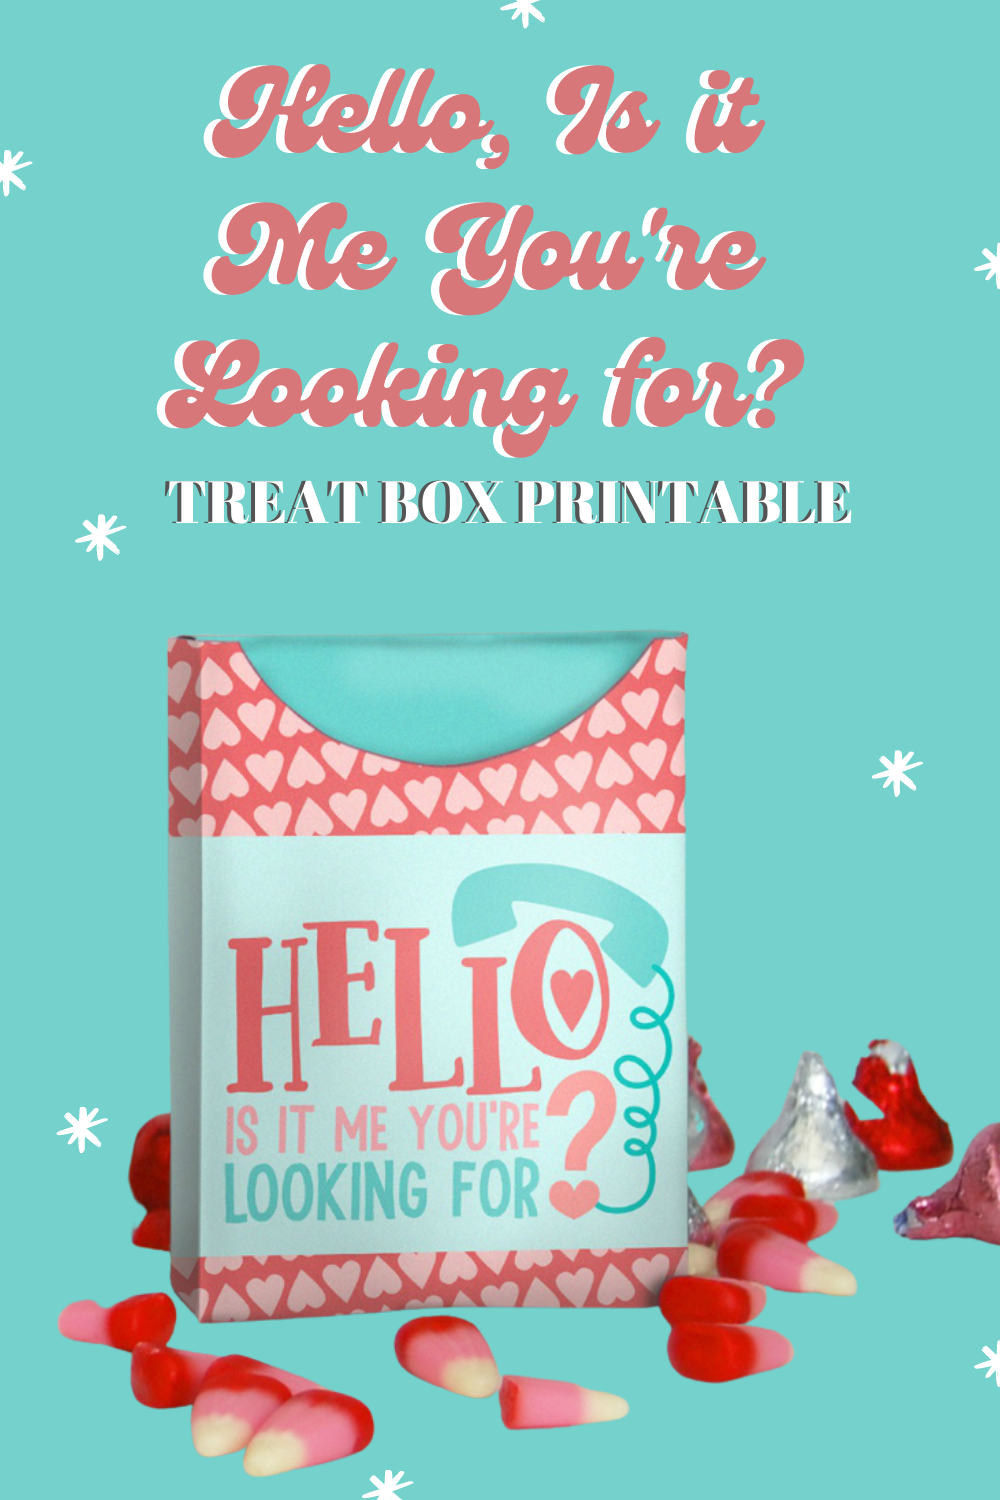 Text reads, "Hello, is it me you're looking for?" Treat box printable. It is a teal background with a treat box in the center.